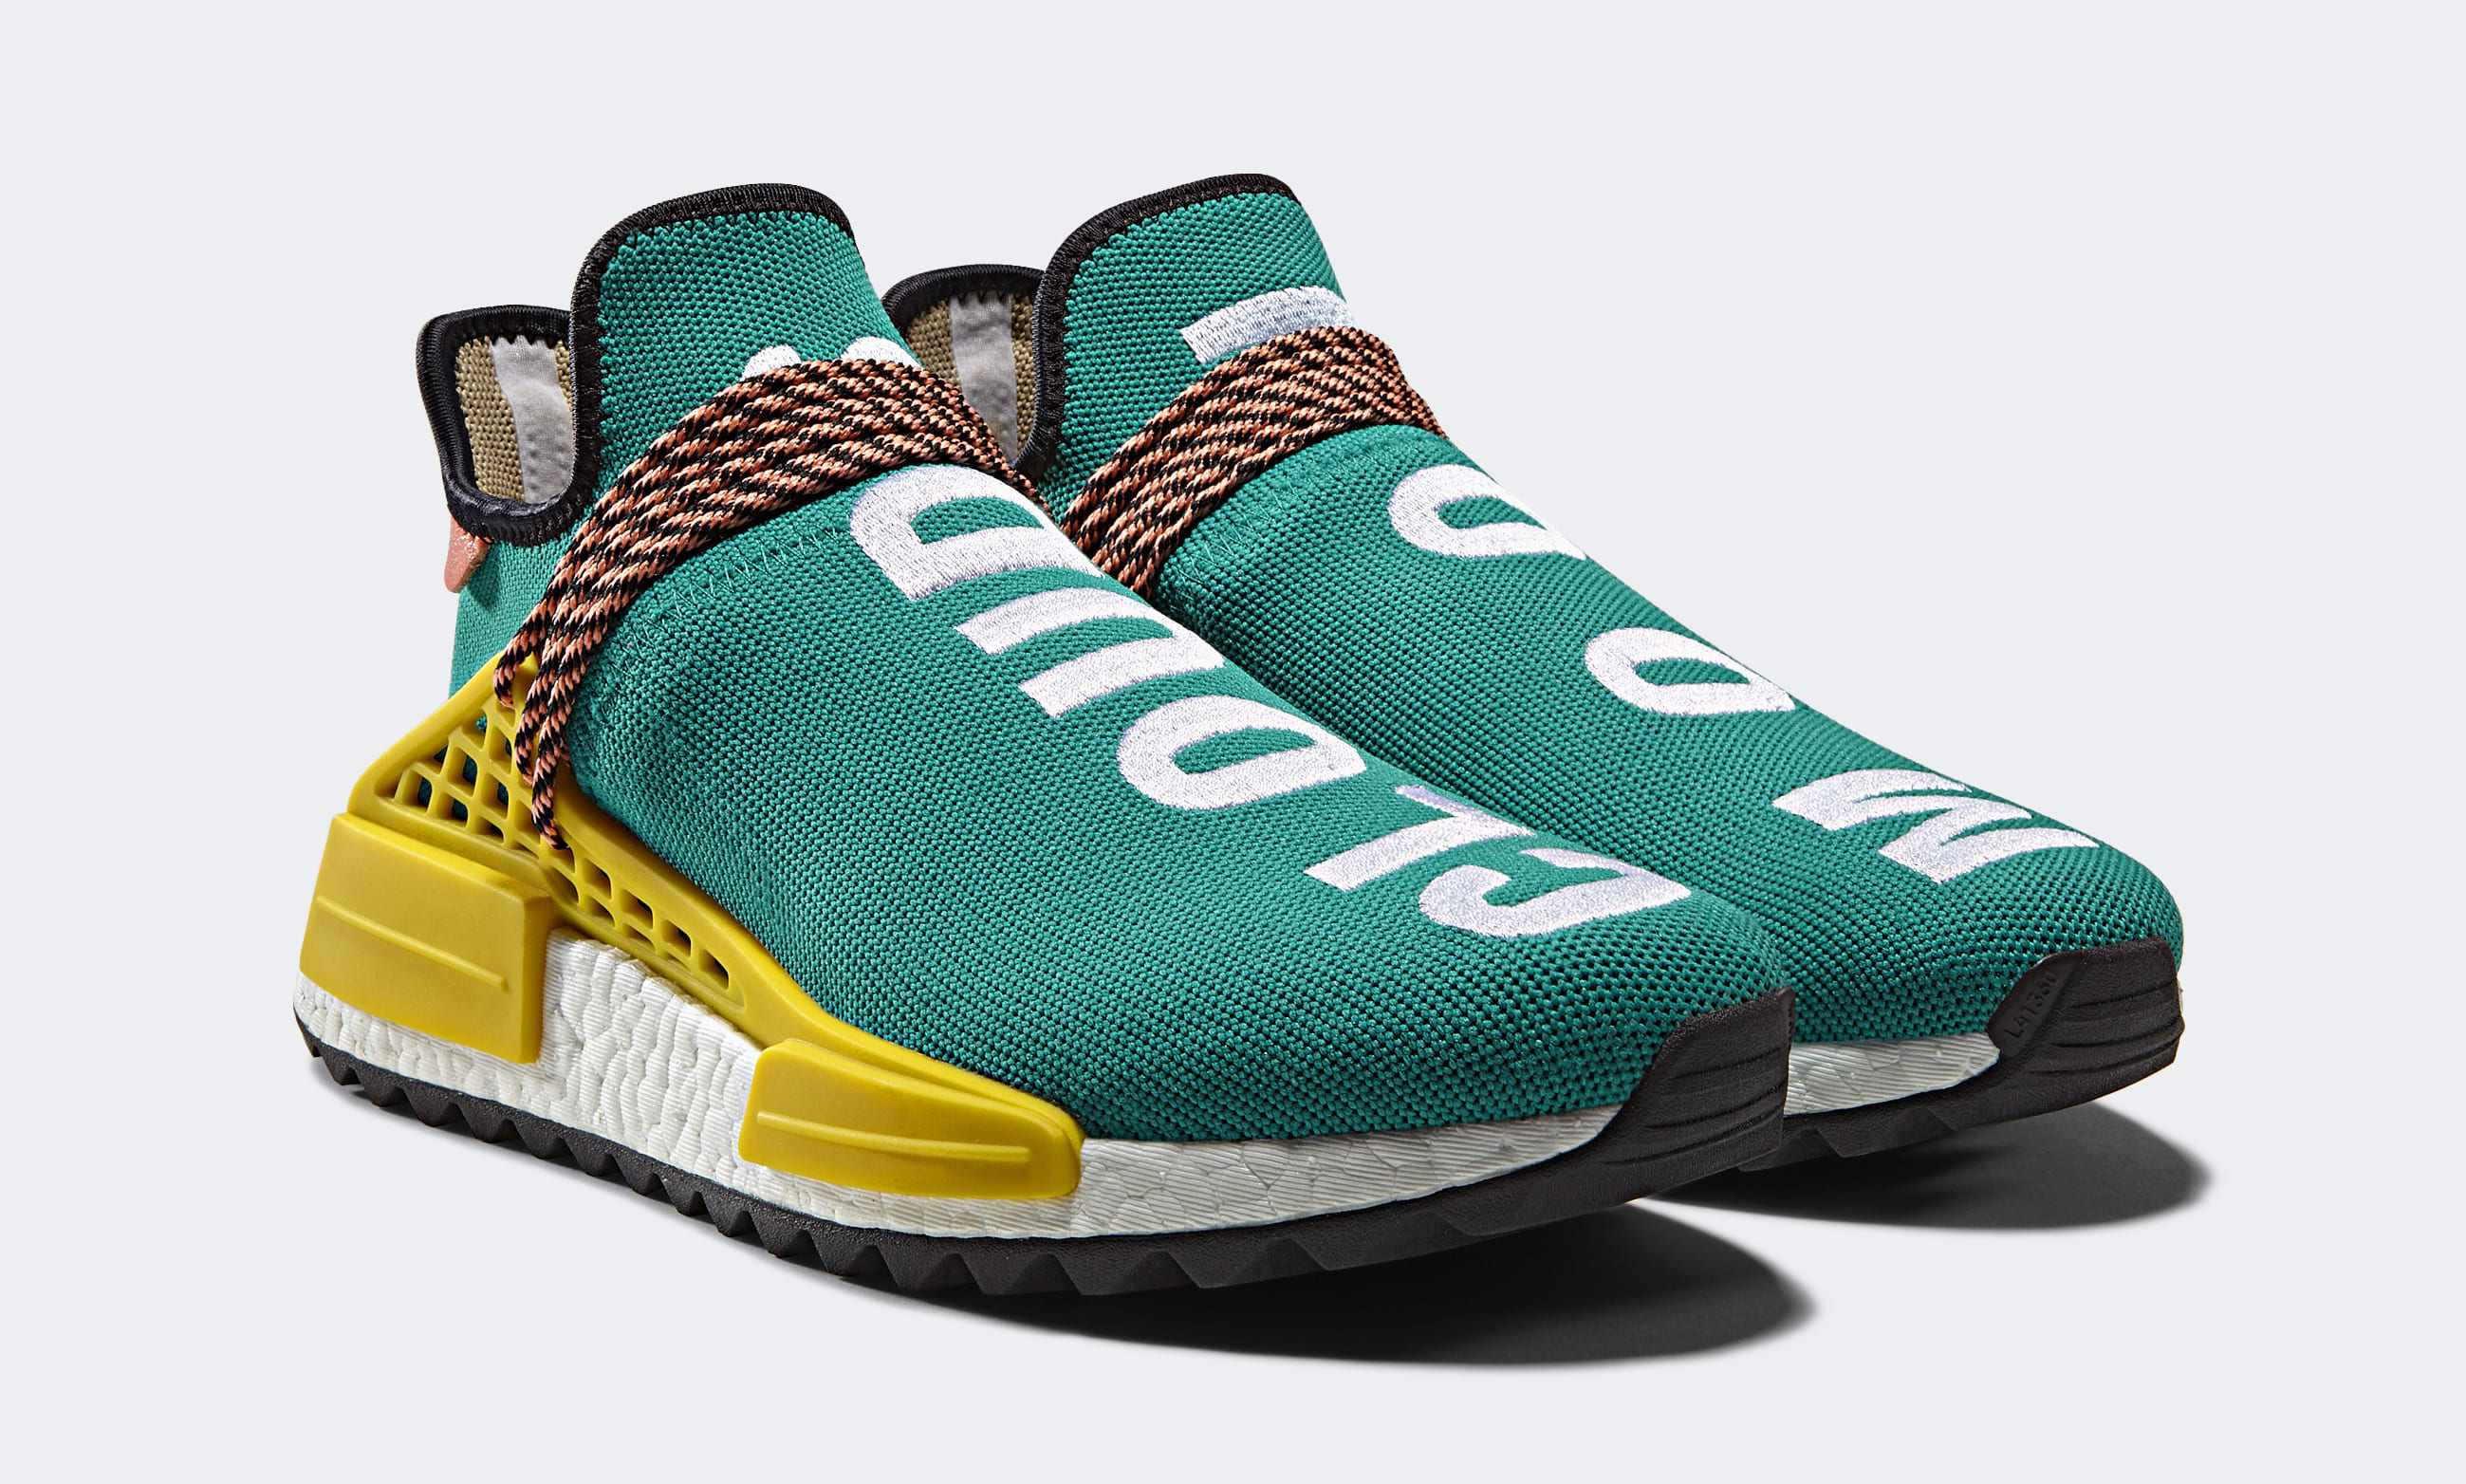 Pharrell x Adidas Originals NMD TR 'Hiking Collection' AC7361 AC7188 AC7359 AC7360 Date | Sole Collector